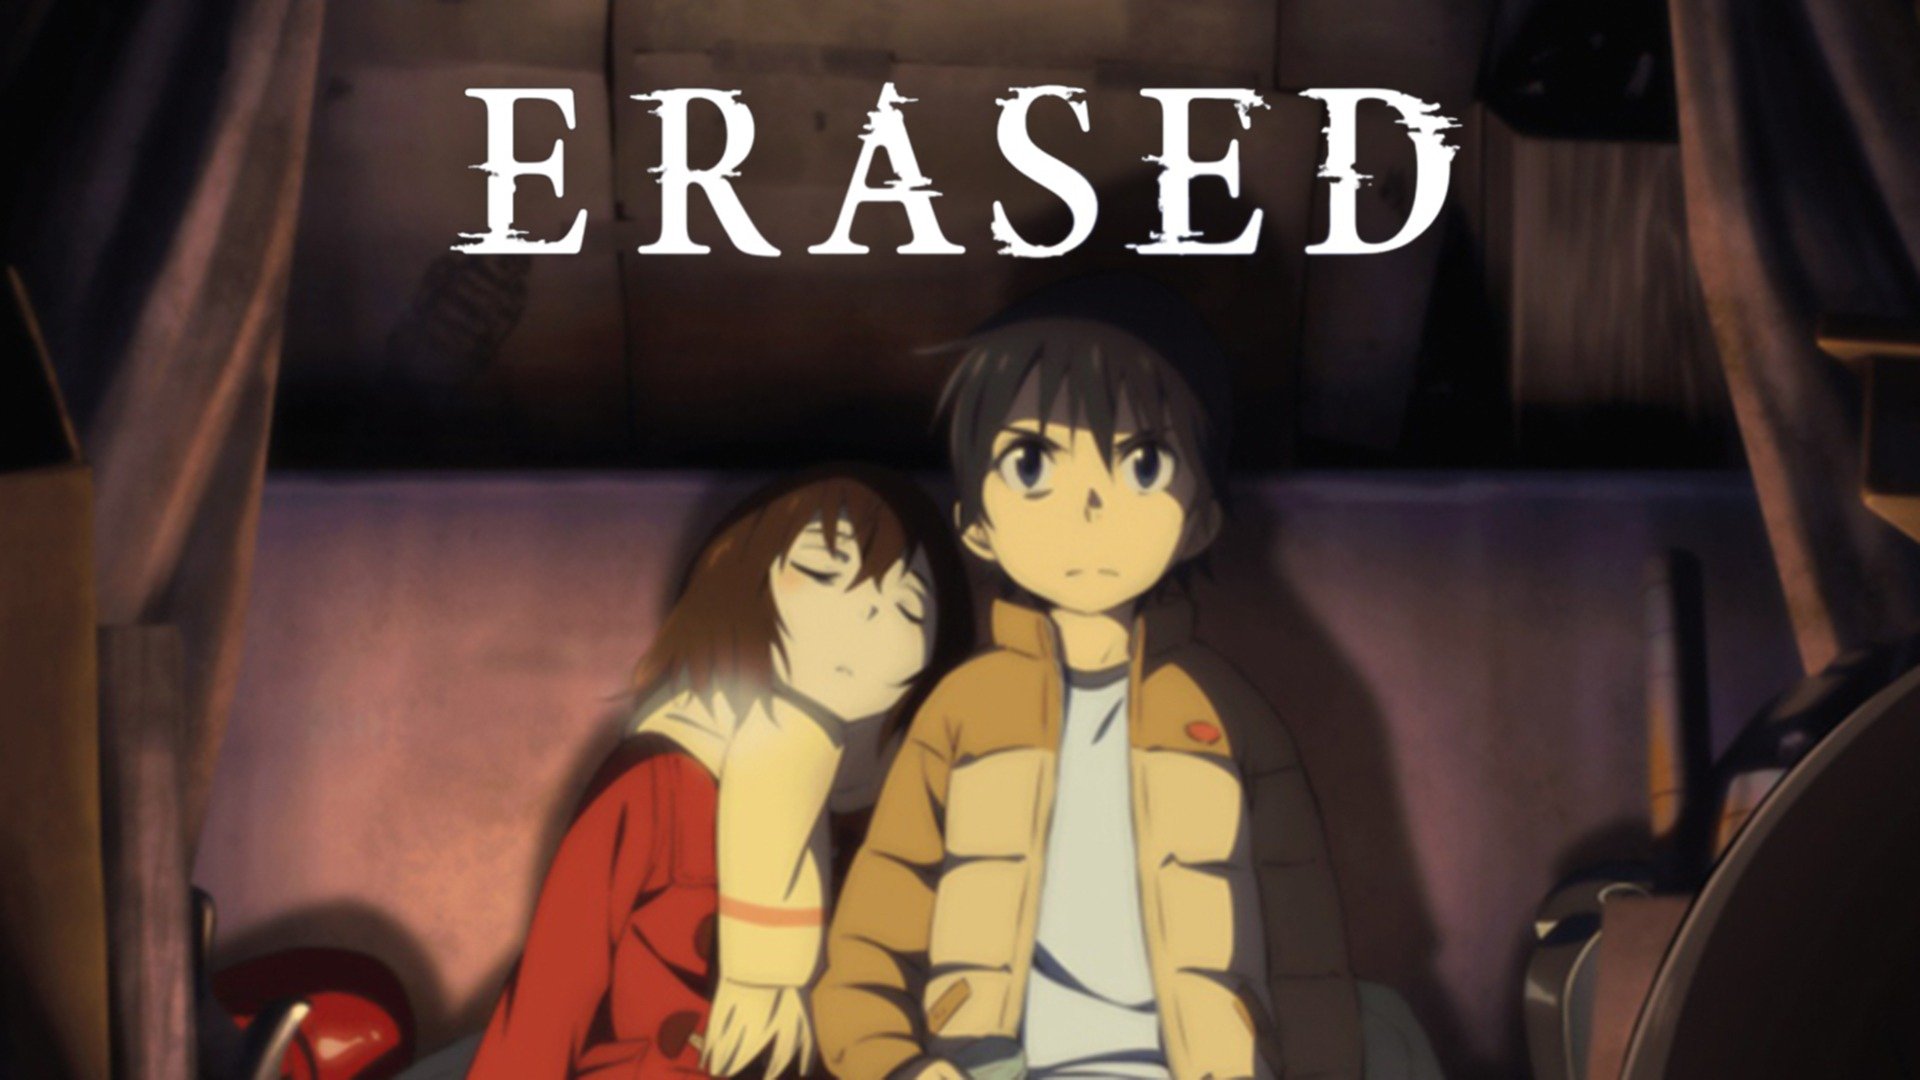 Amazon.com: ERASED Anime Poster Cartoon Poster Bedroom Room Decoration Wall  Art Paintings Canvas Wall Decor Home Decor Living Room Decor Aesthetic  Prints 08x12inch(20x30cm) Unframe-style: Posters & Prints